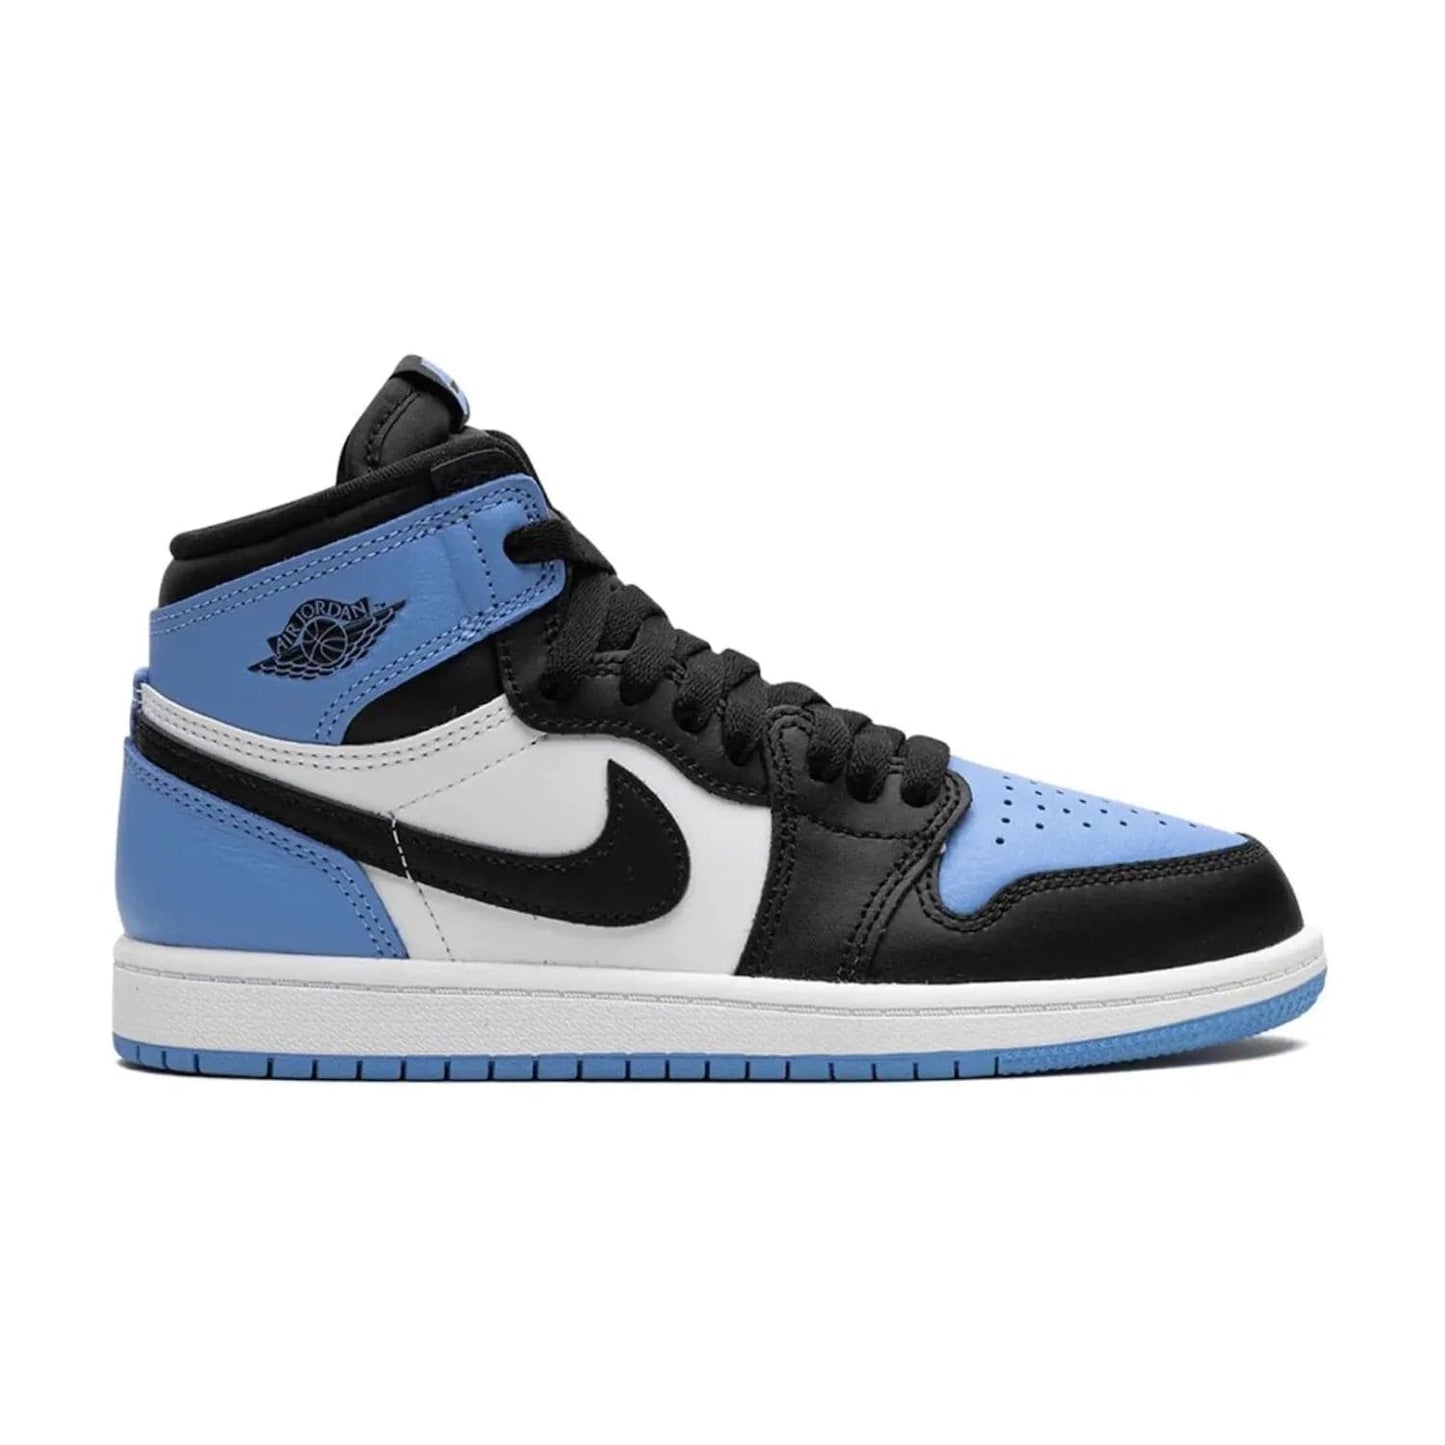 Jordan 1 Retro High OG UNC Toe (PS) - Image 1 - Only at www.BallersClubKickz.com - Shop the Jordan 1 Retro High OG UNC Toe (PS)! Classic OG style with sleek University Blue, Black, and White colorway. Premium leather for luxurious look and feel. Step onto the court in style today!